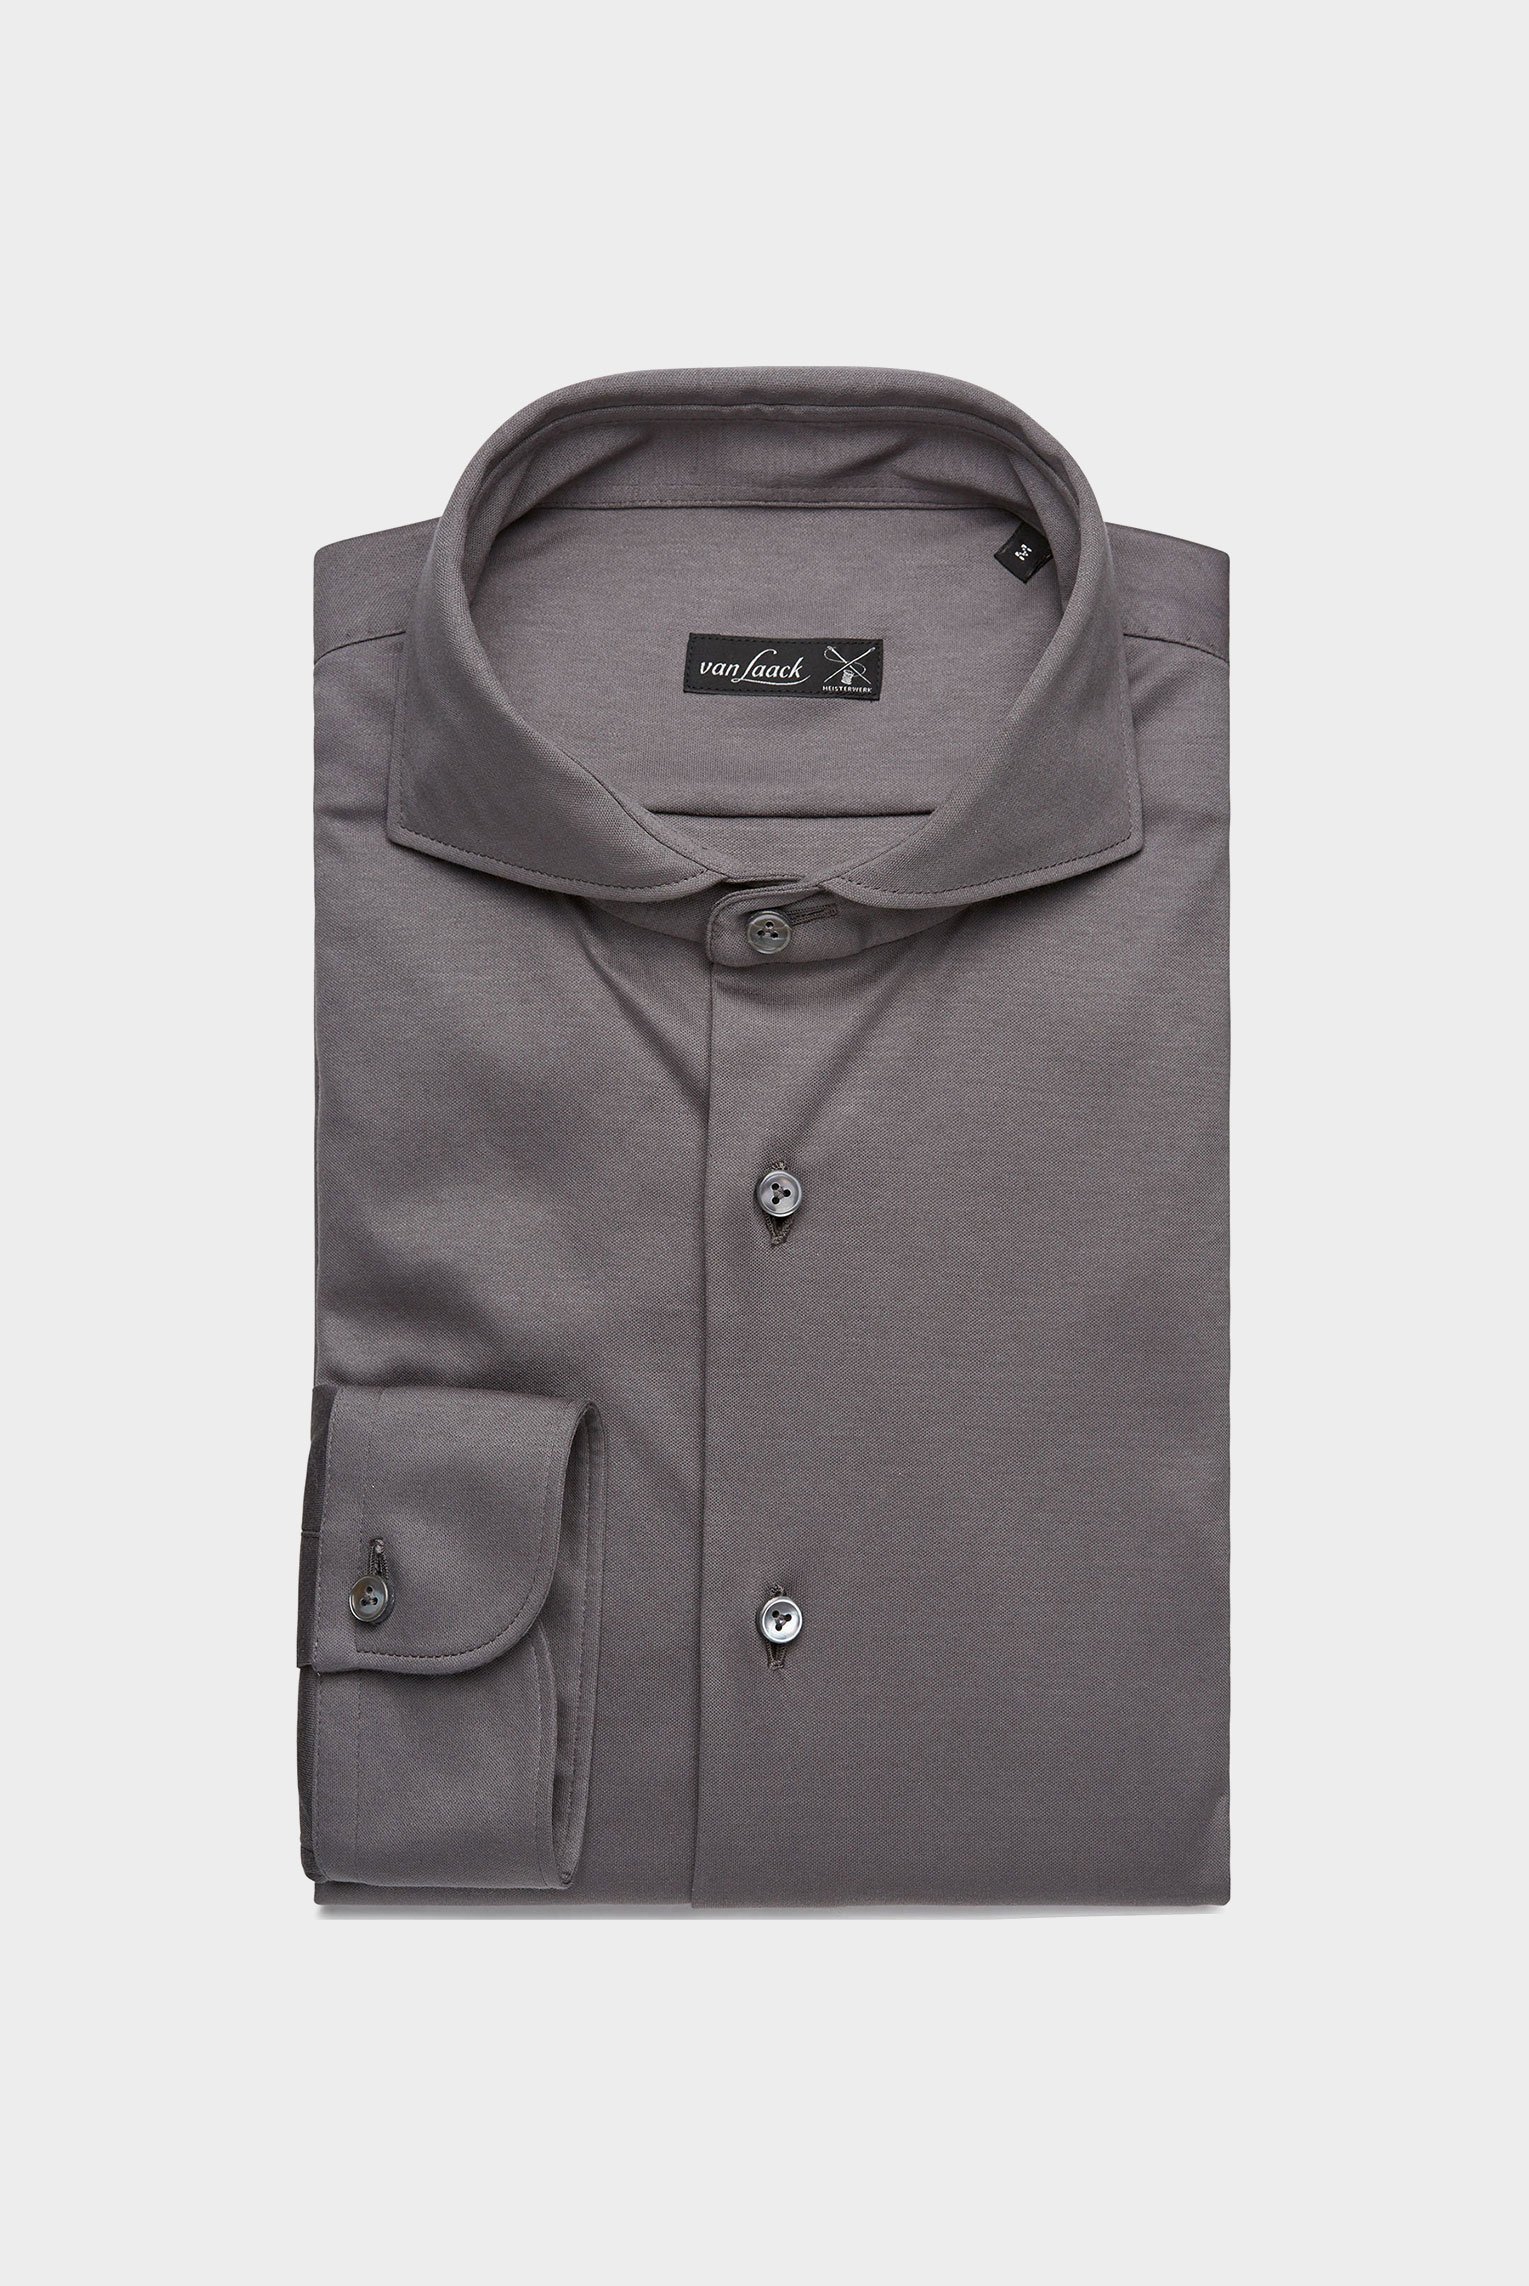 Casual Shirts+Jersey Shirt Swiss Cotton Tailor Fit+20.1683.UC.180031.070.X4L